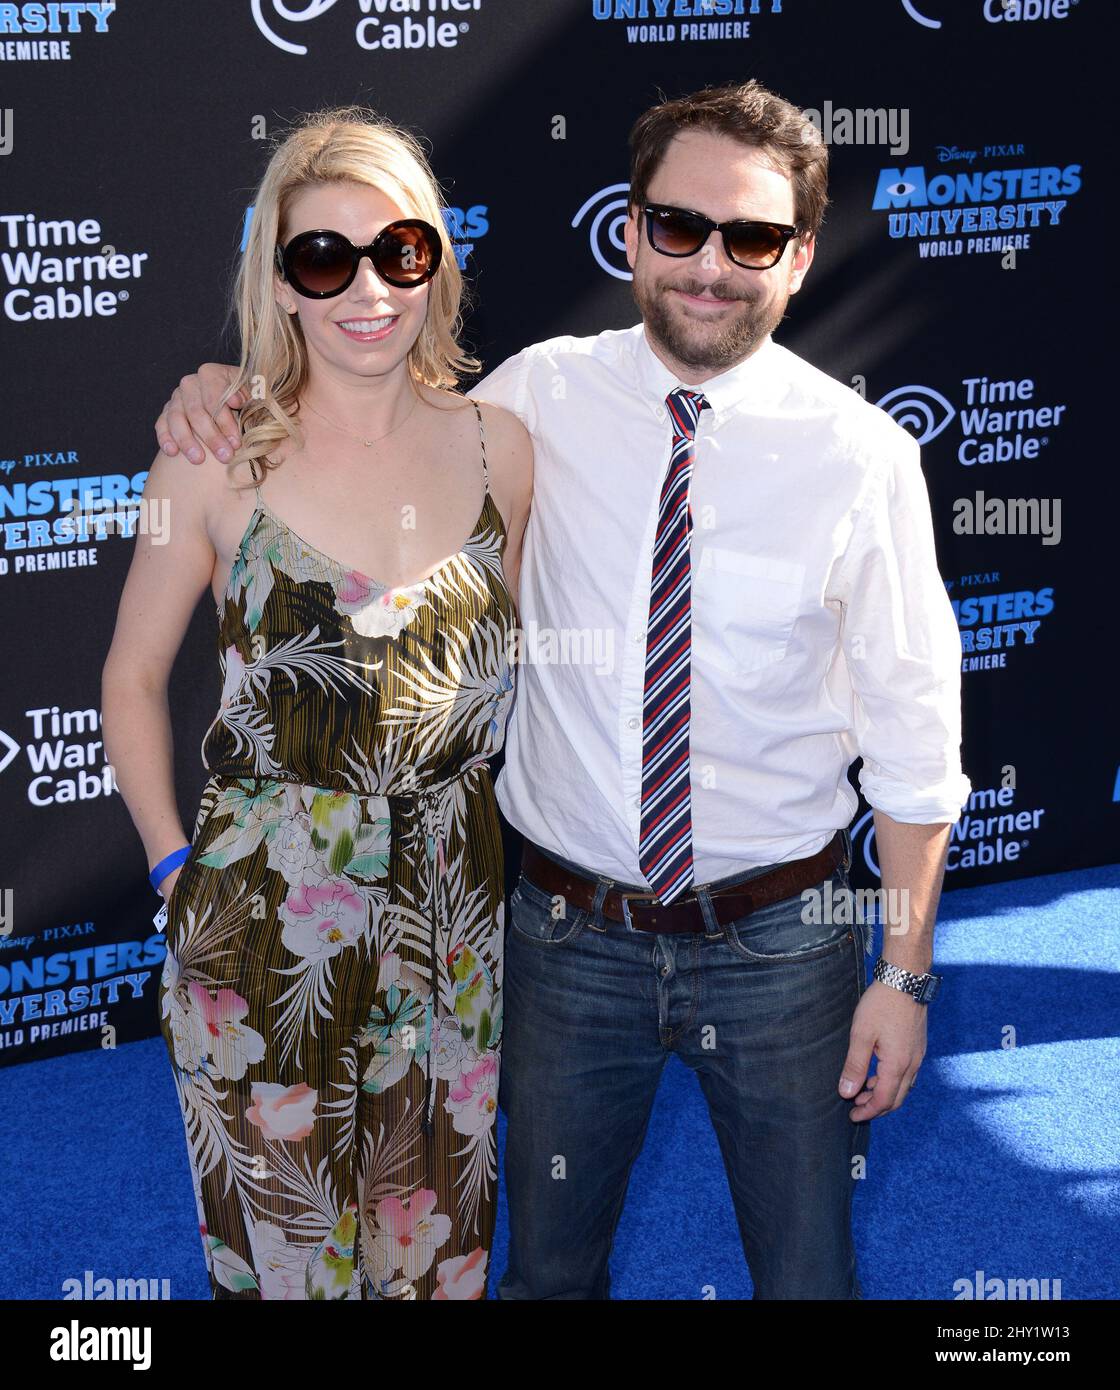 LOS ANGELES, CALIFORNIA, USA - FEBRUARY 08: Actor Charlie Day and wife/actress  Mary Elizabeth Ellis arrive at the Los Angeles Premiere Of  Prime's  'I Want You Back' held at ROW DTLA